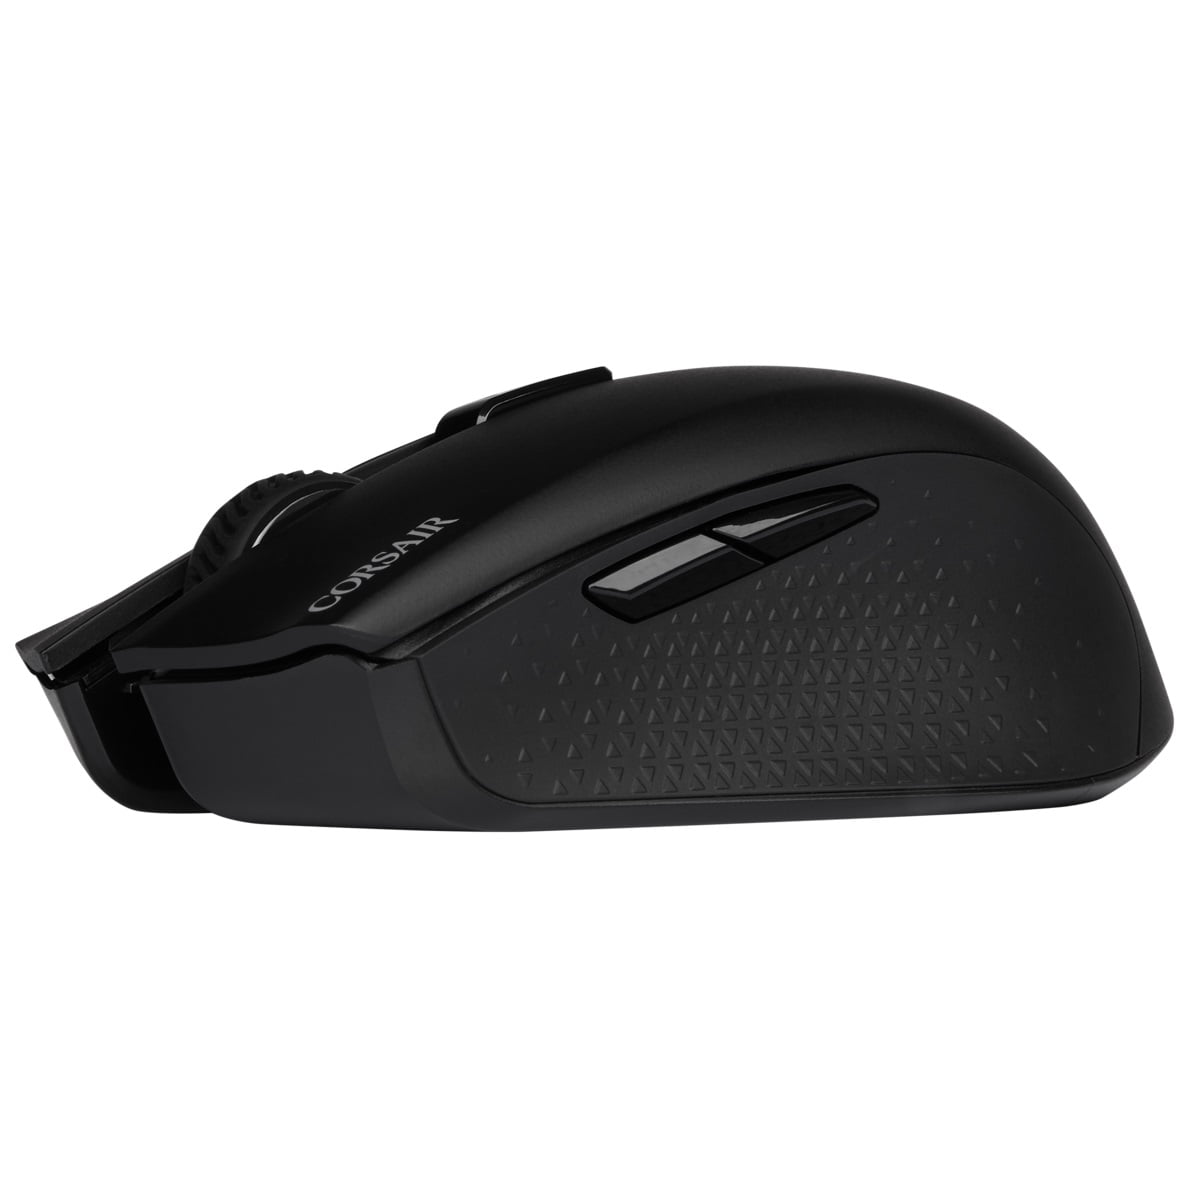 Umoderne mentalitet Slagskib CORSAIR Harpoon RGB Wireless - Wireless Rechargeable Gaming Mouse - 10,000  DPI Optical Sensor. SlipStream Wireless, Bluetooth or USB Wired  Connectivity. Win Without Wires! - Walmart.com